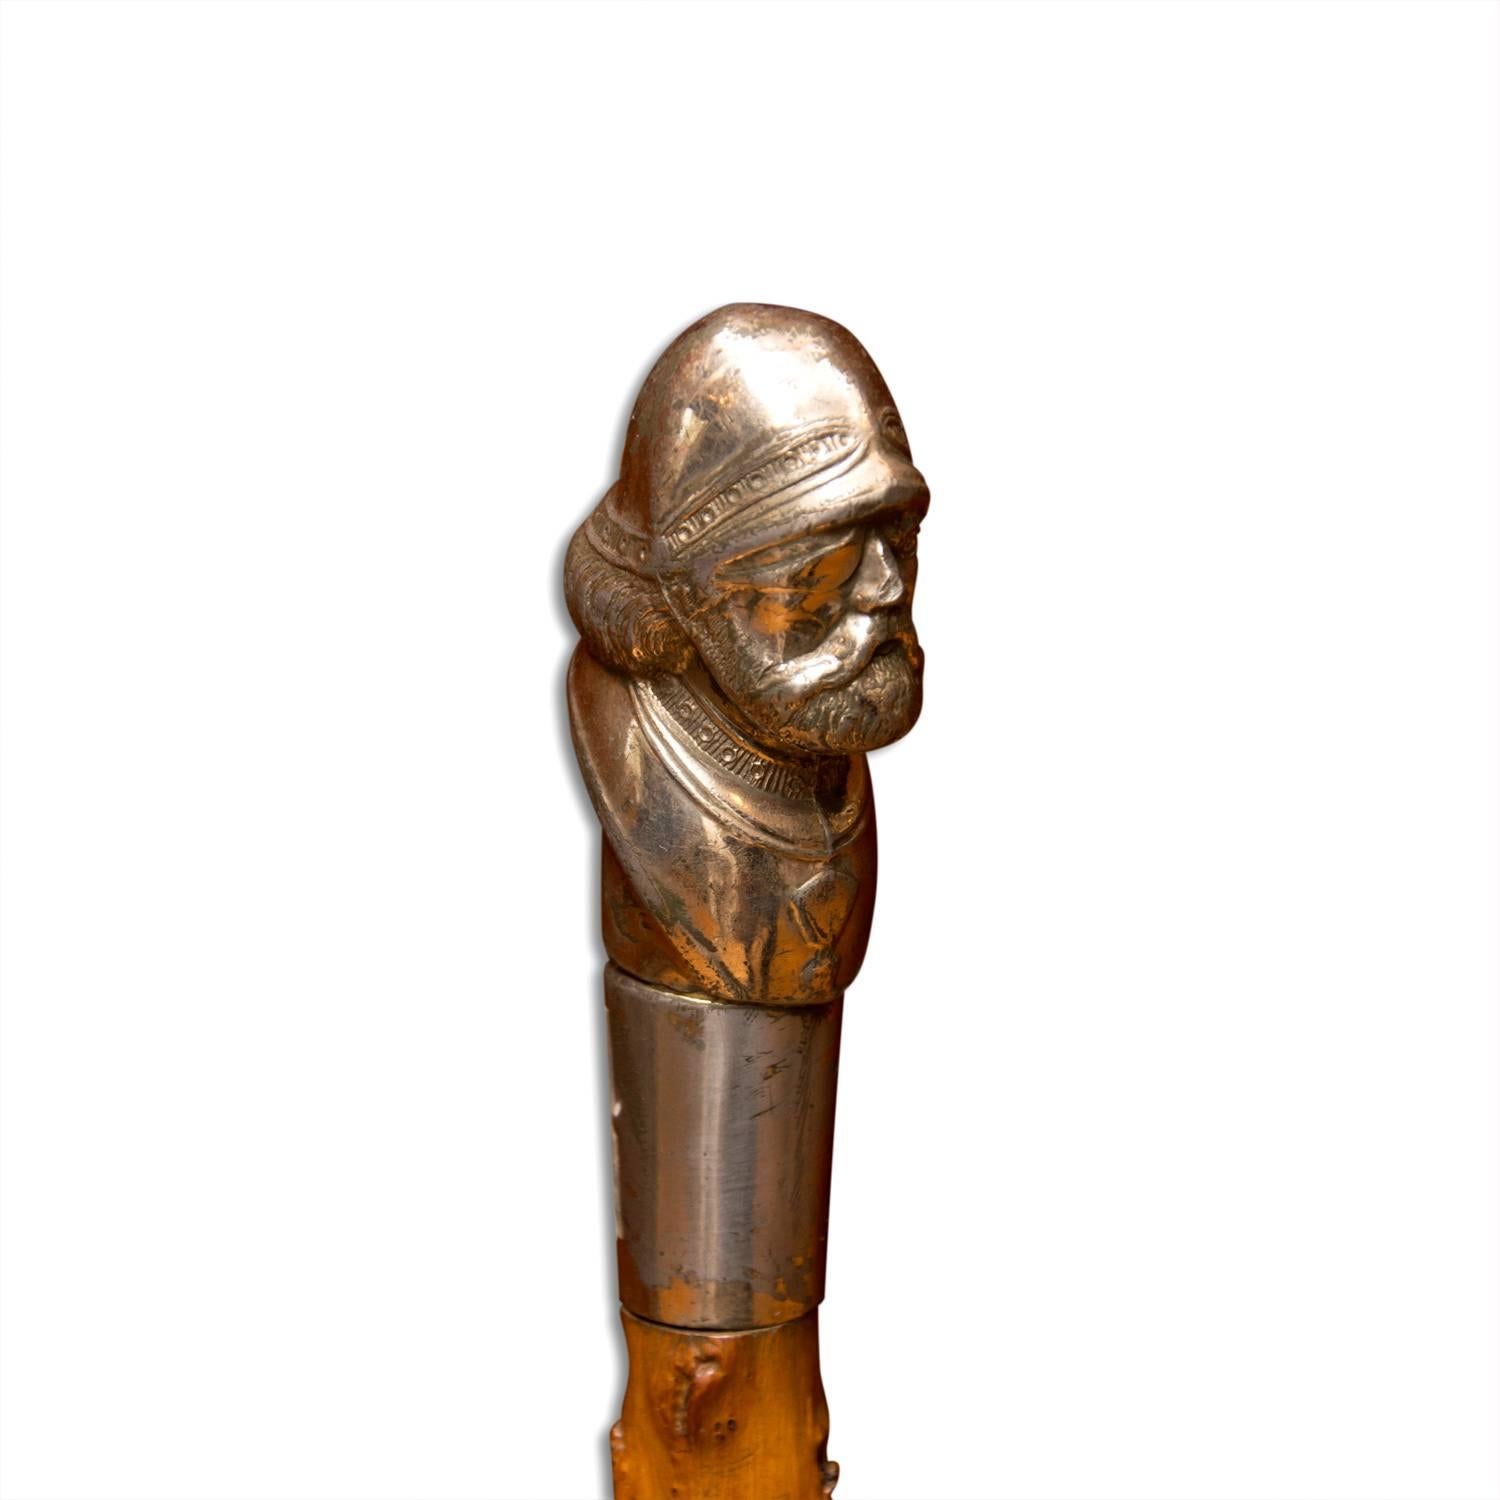 Antique wooden walking stick made in Bohemia at the end of the 19th century. The stick is finished with a chromed portrait of the head of the historically most famous Czech Hussite leader Jan Žižka.